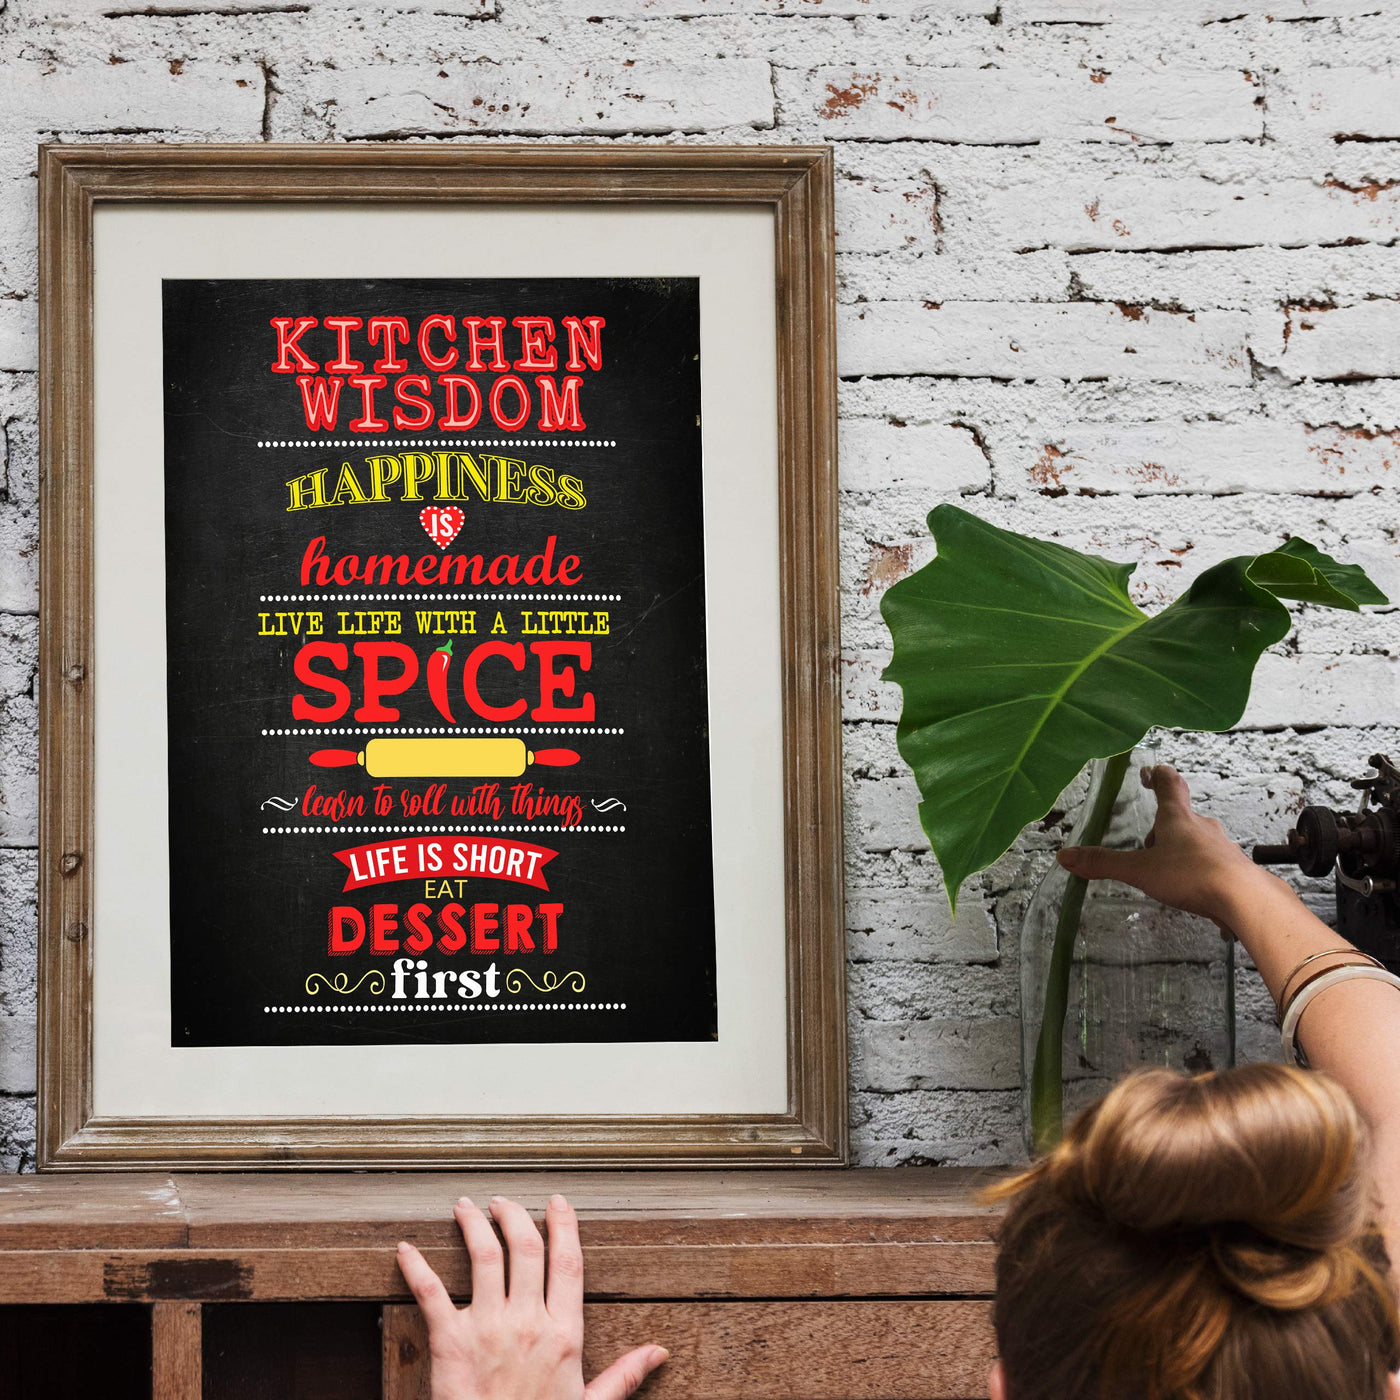 Kitchen Wisdom Funny Kitchen Sign -11 x 14" Rustic Farmhouse Wall Art Print-Ready to Frame. Typographic Design. Humorous Home-Kitchen-Dining Room Decor. Fun, Inspirational Life Lessons. Great Gift!